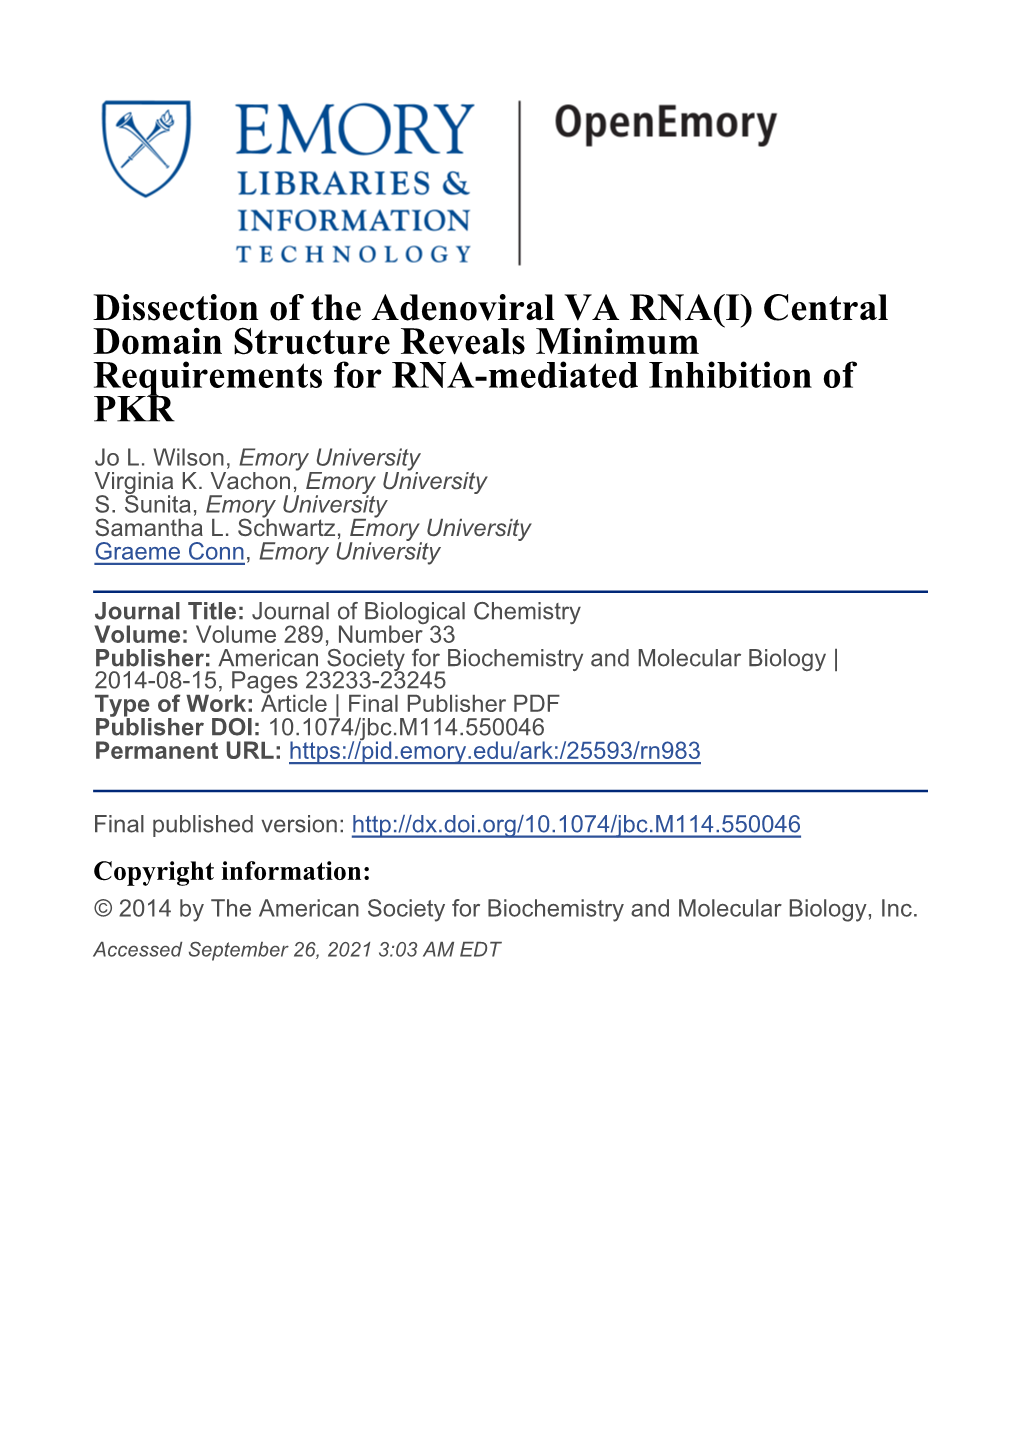 Dissection of the Adenoviral VA RNA(I) Central Domain Structure Reveals Minimum Requirements for RNA-Mediated Inhibition of PKR Jo L